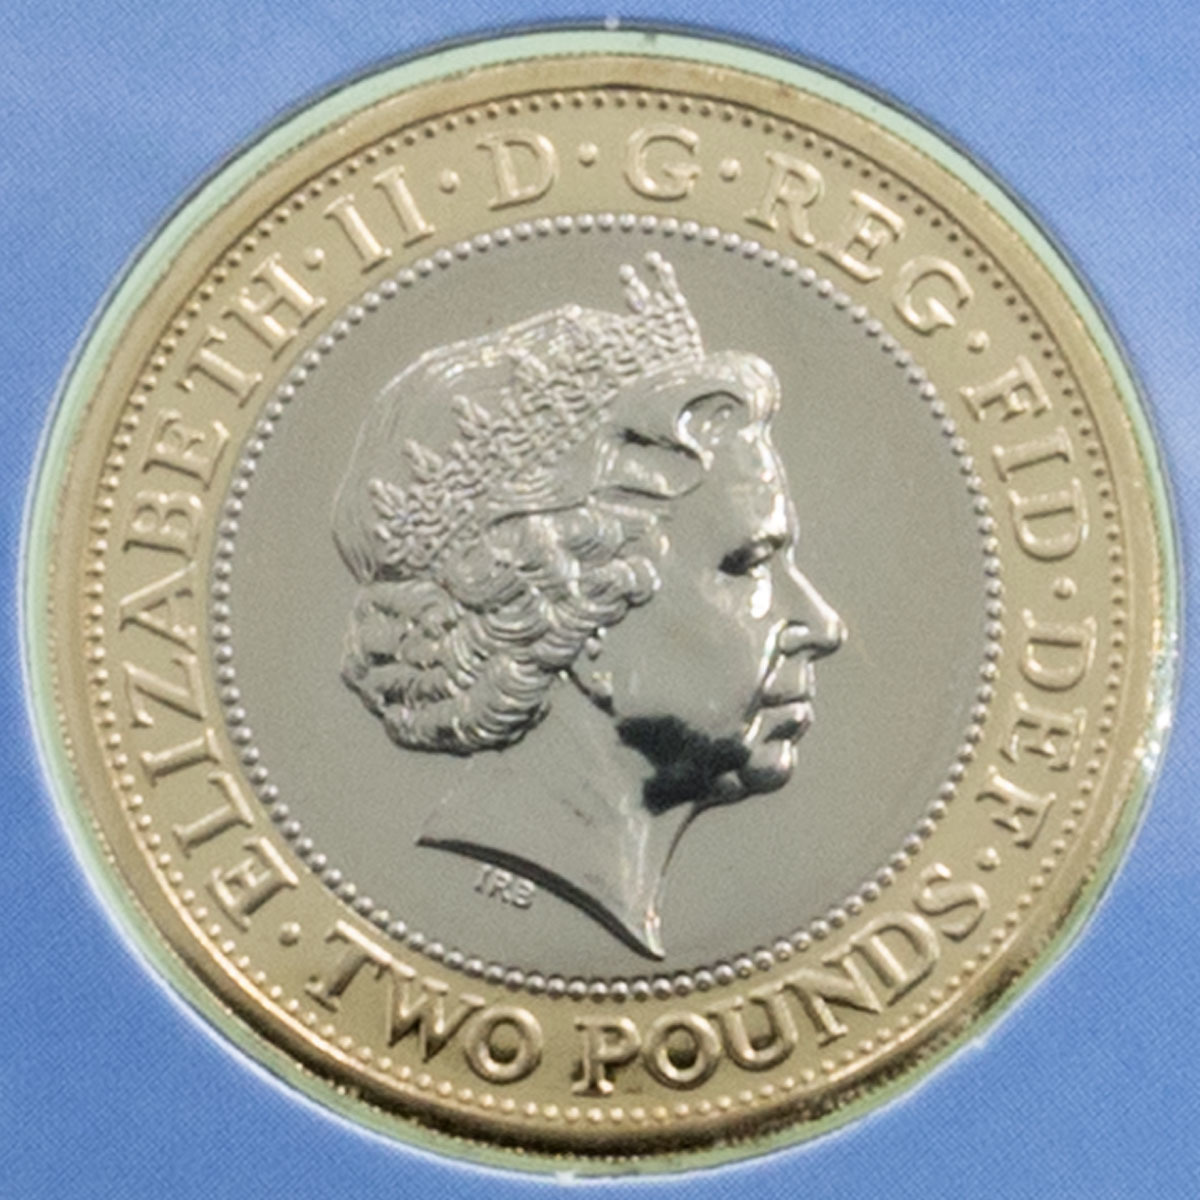 UK15W1BU 2015 Royal Navy First World War Two Pound Brilliant Uncirculated Coin In Folder Obverse